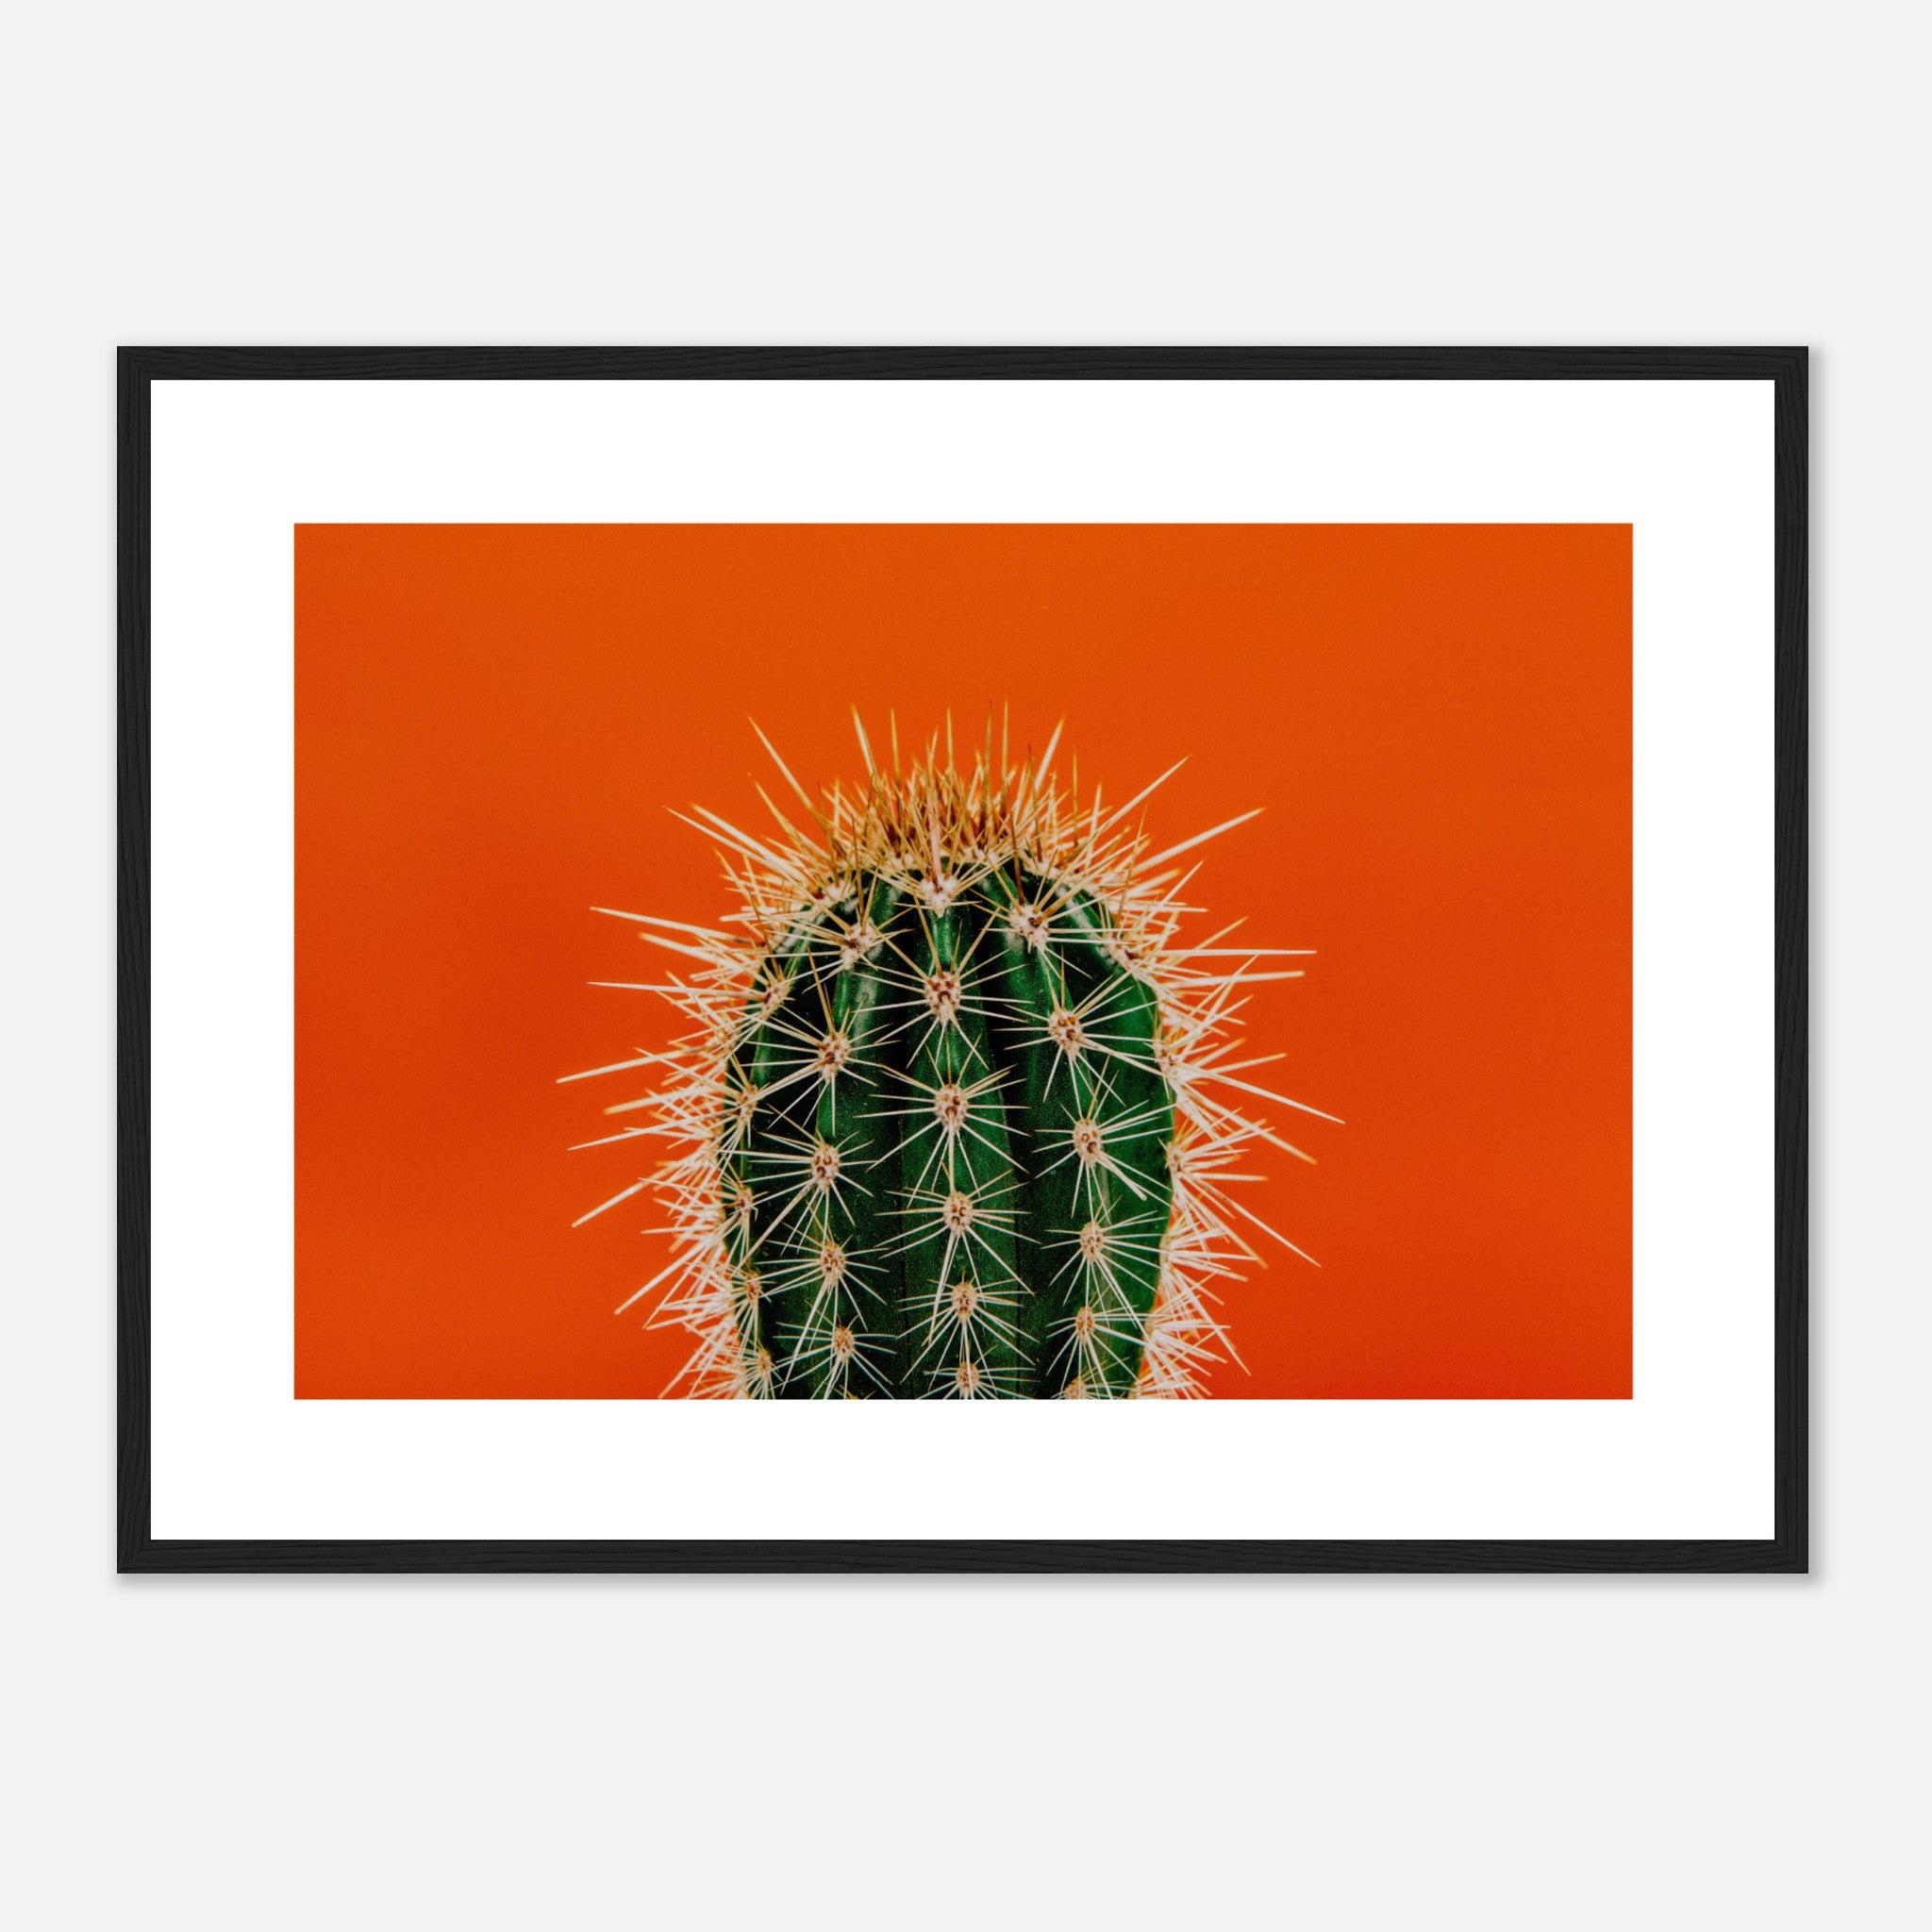 Green Prickly Cactus Poster